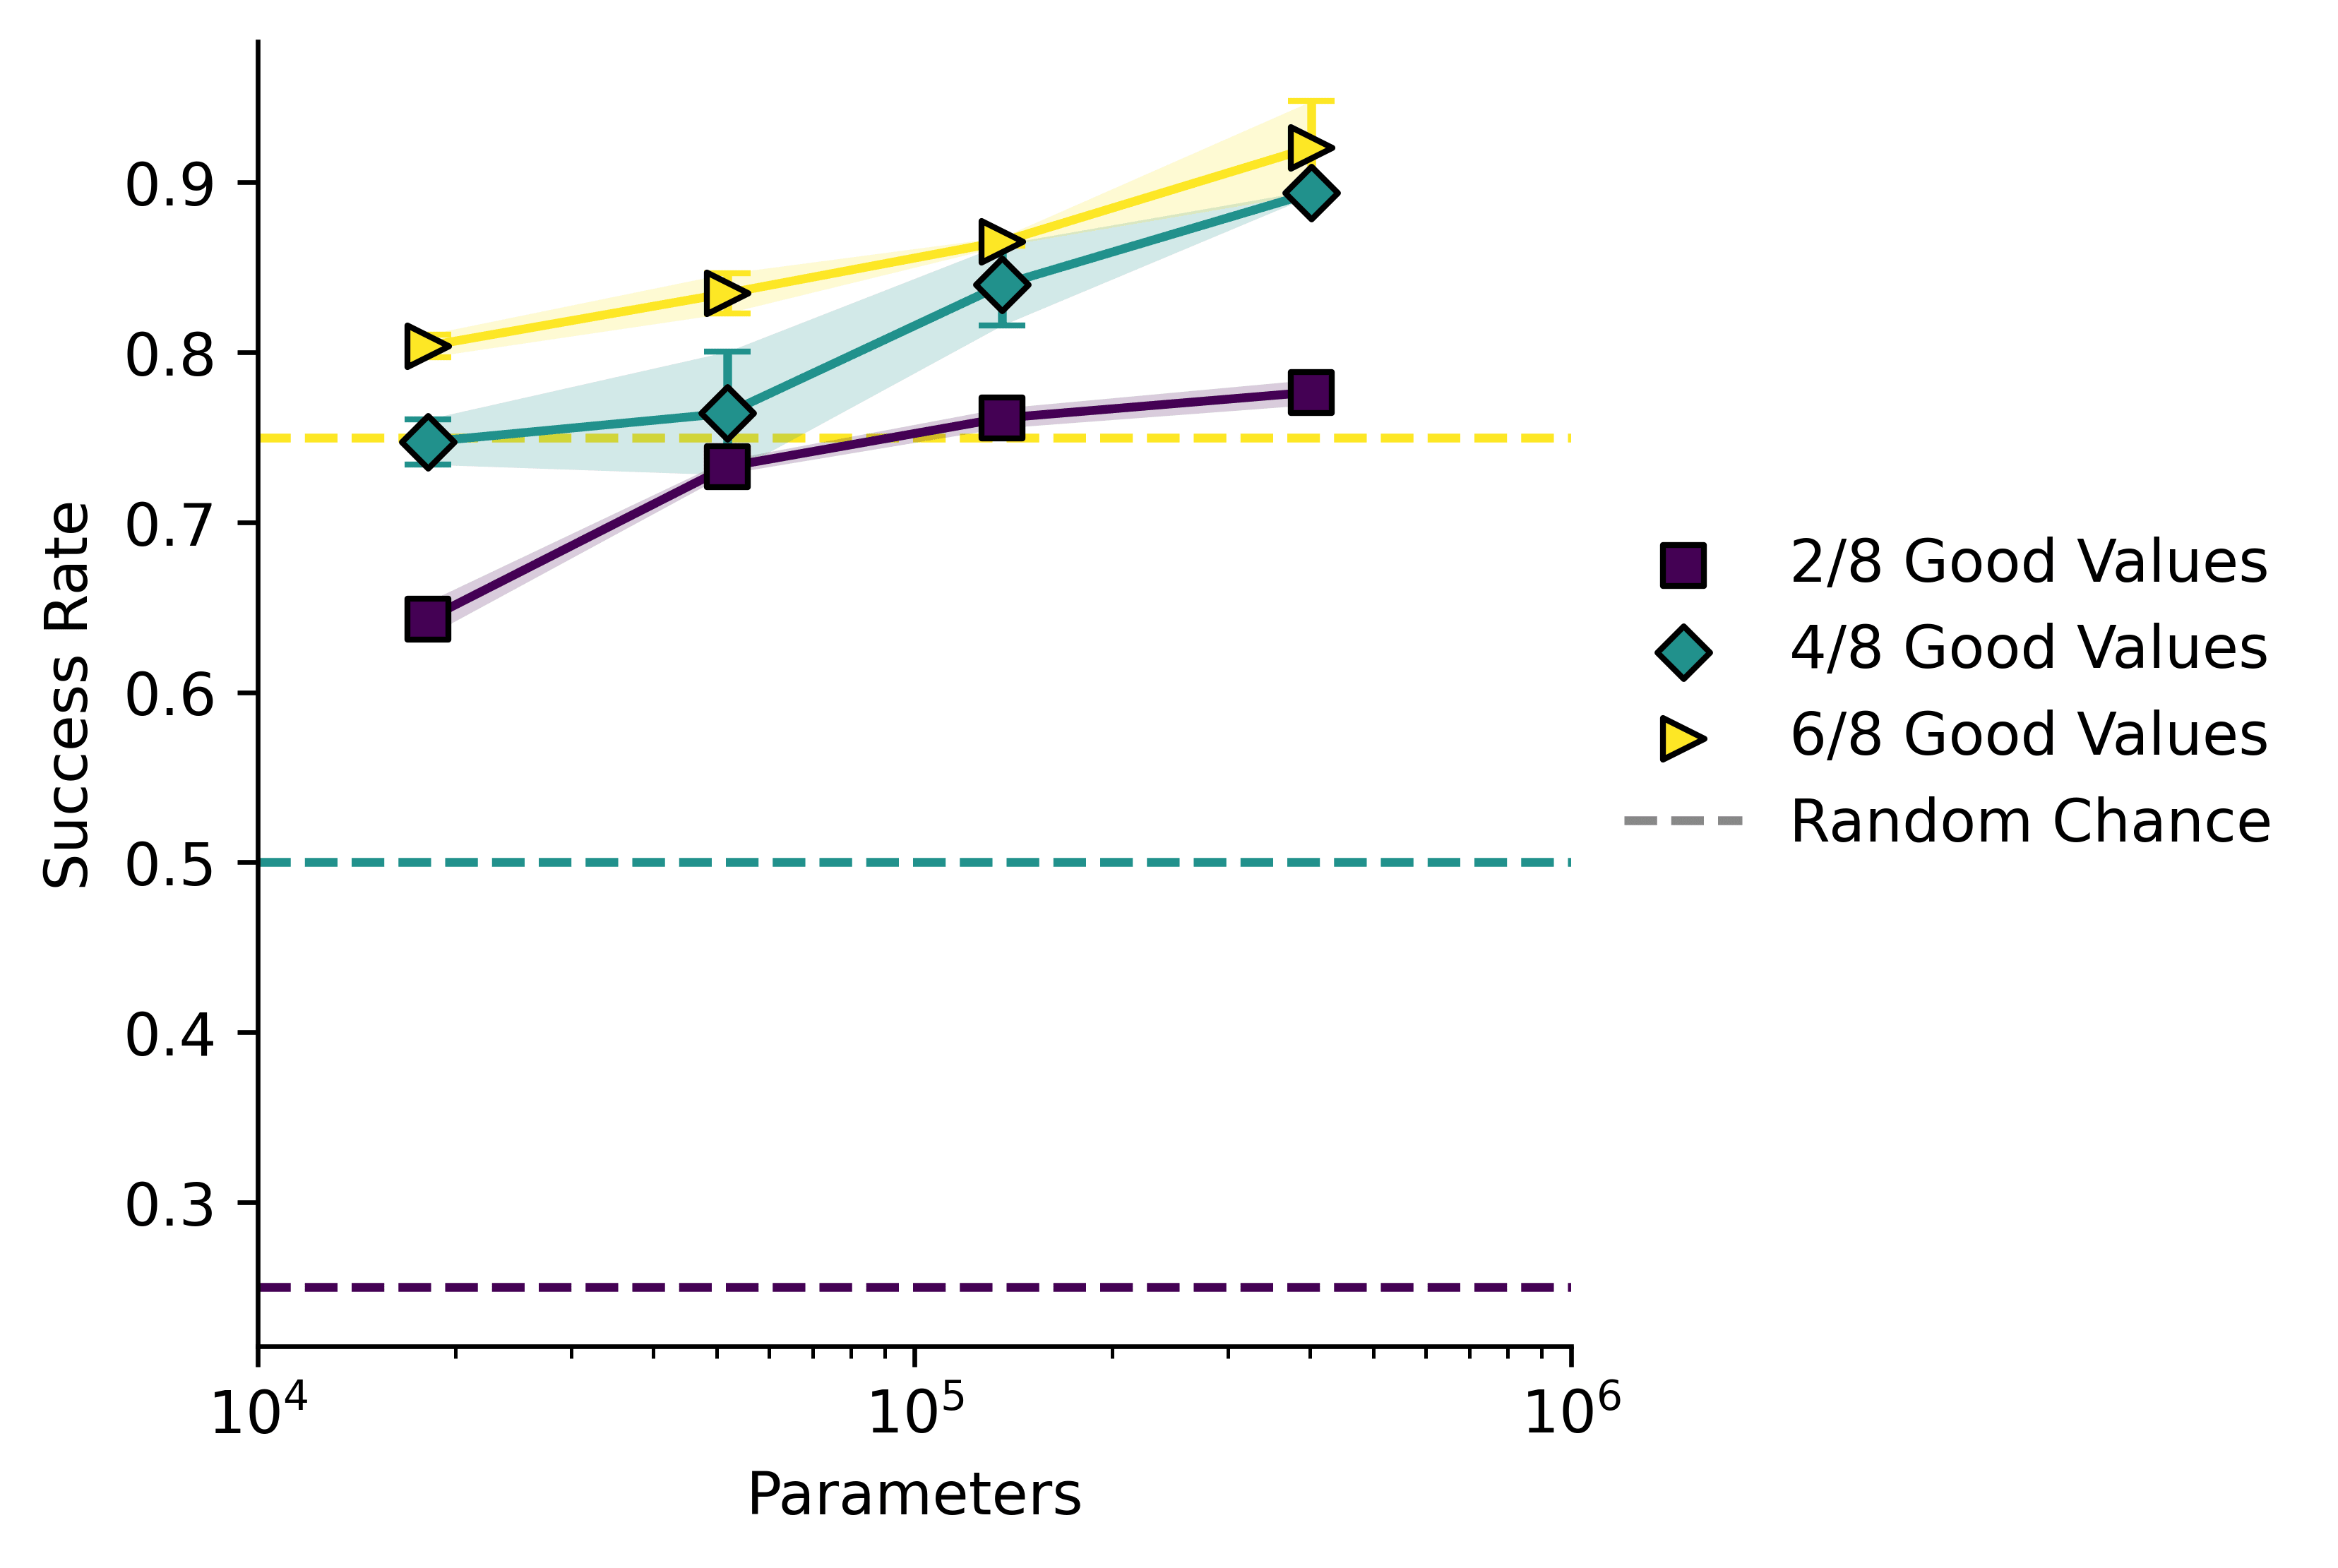 A plot showing success rate against model size on different tasks. Success rate is better than chance in all conditions, and increases with model size in all conditions.